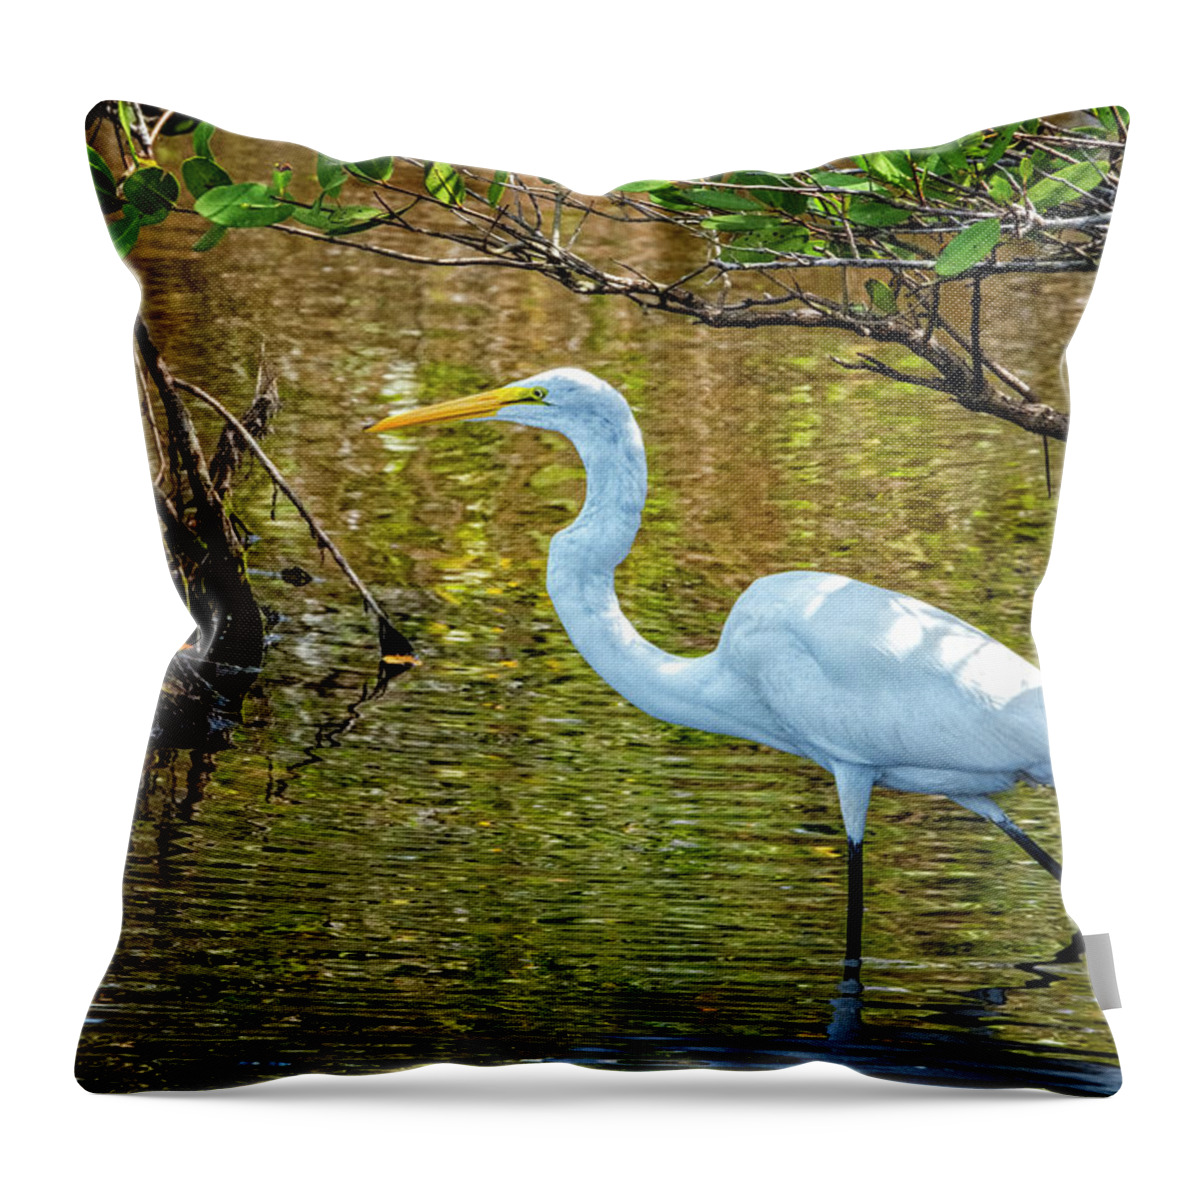 Yard Animals Throw Pillow featuring the photograph Great Egret by Tom Singleton